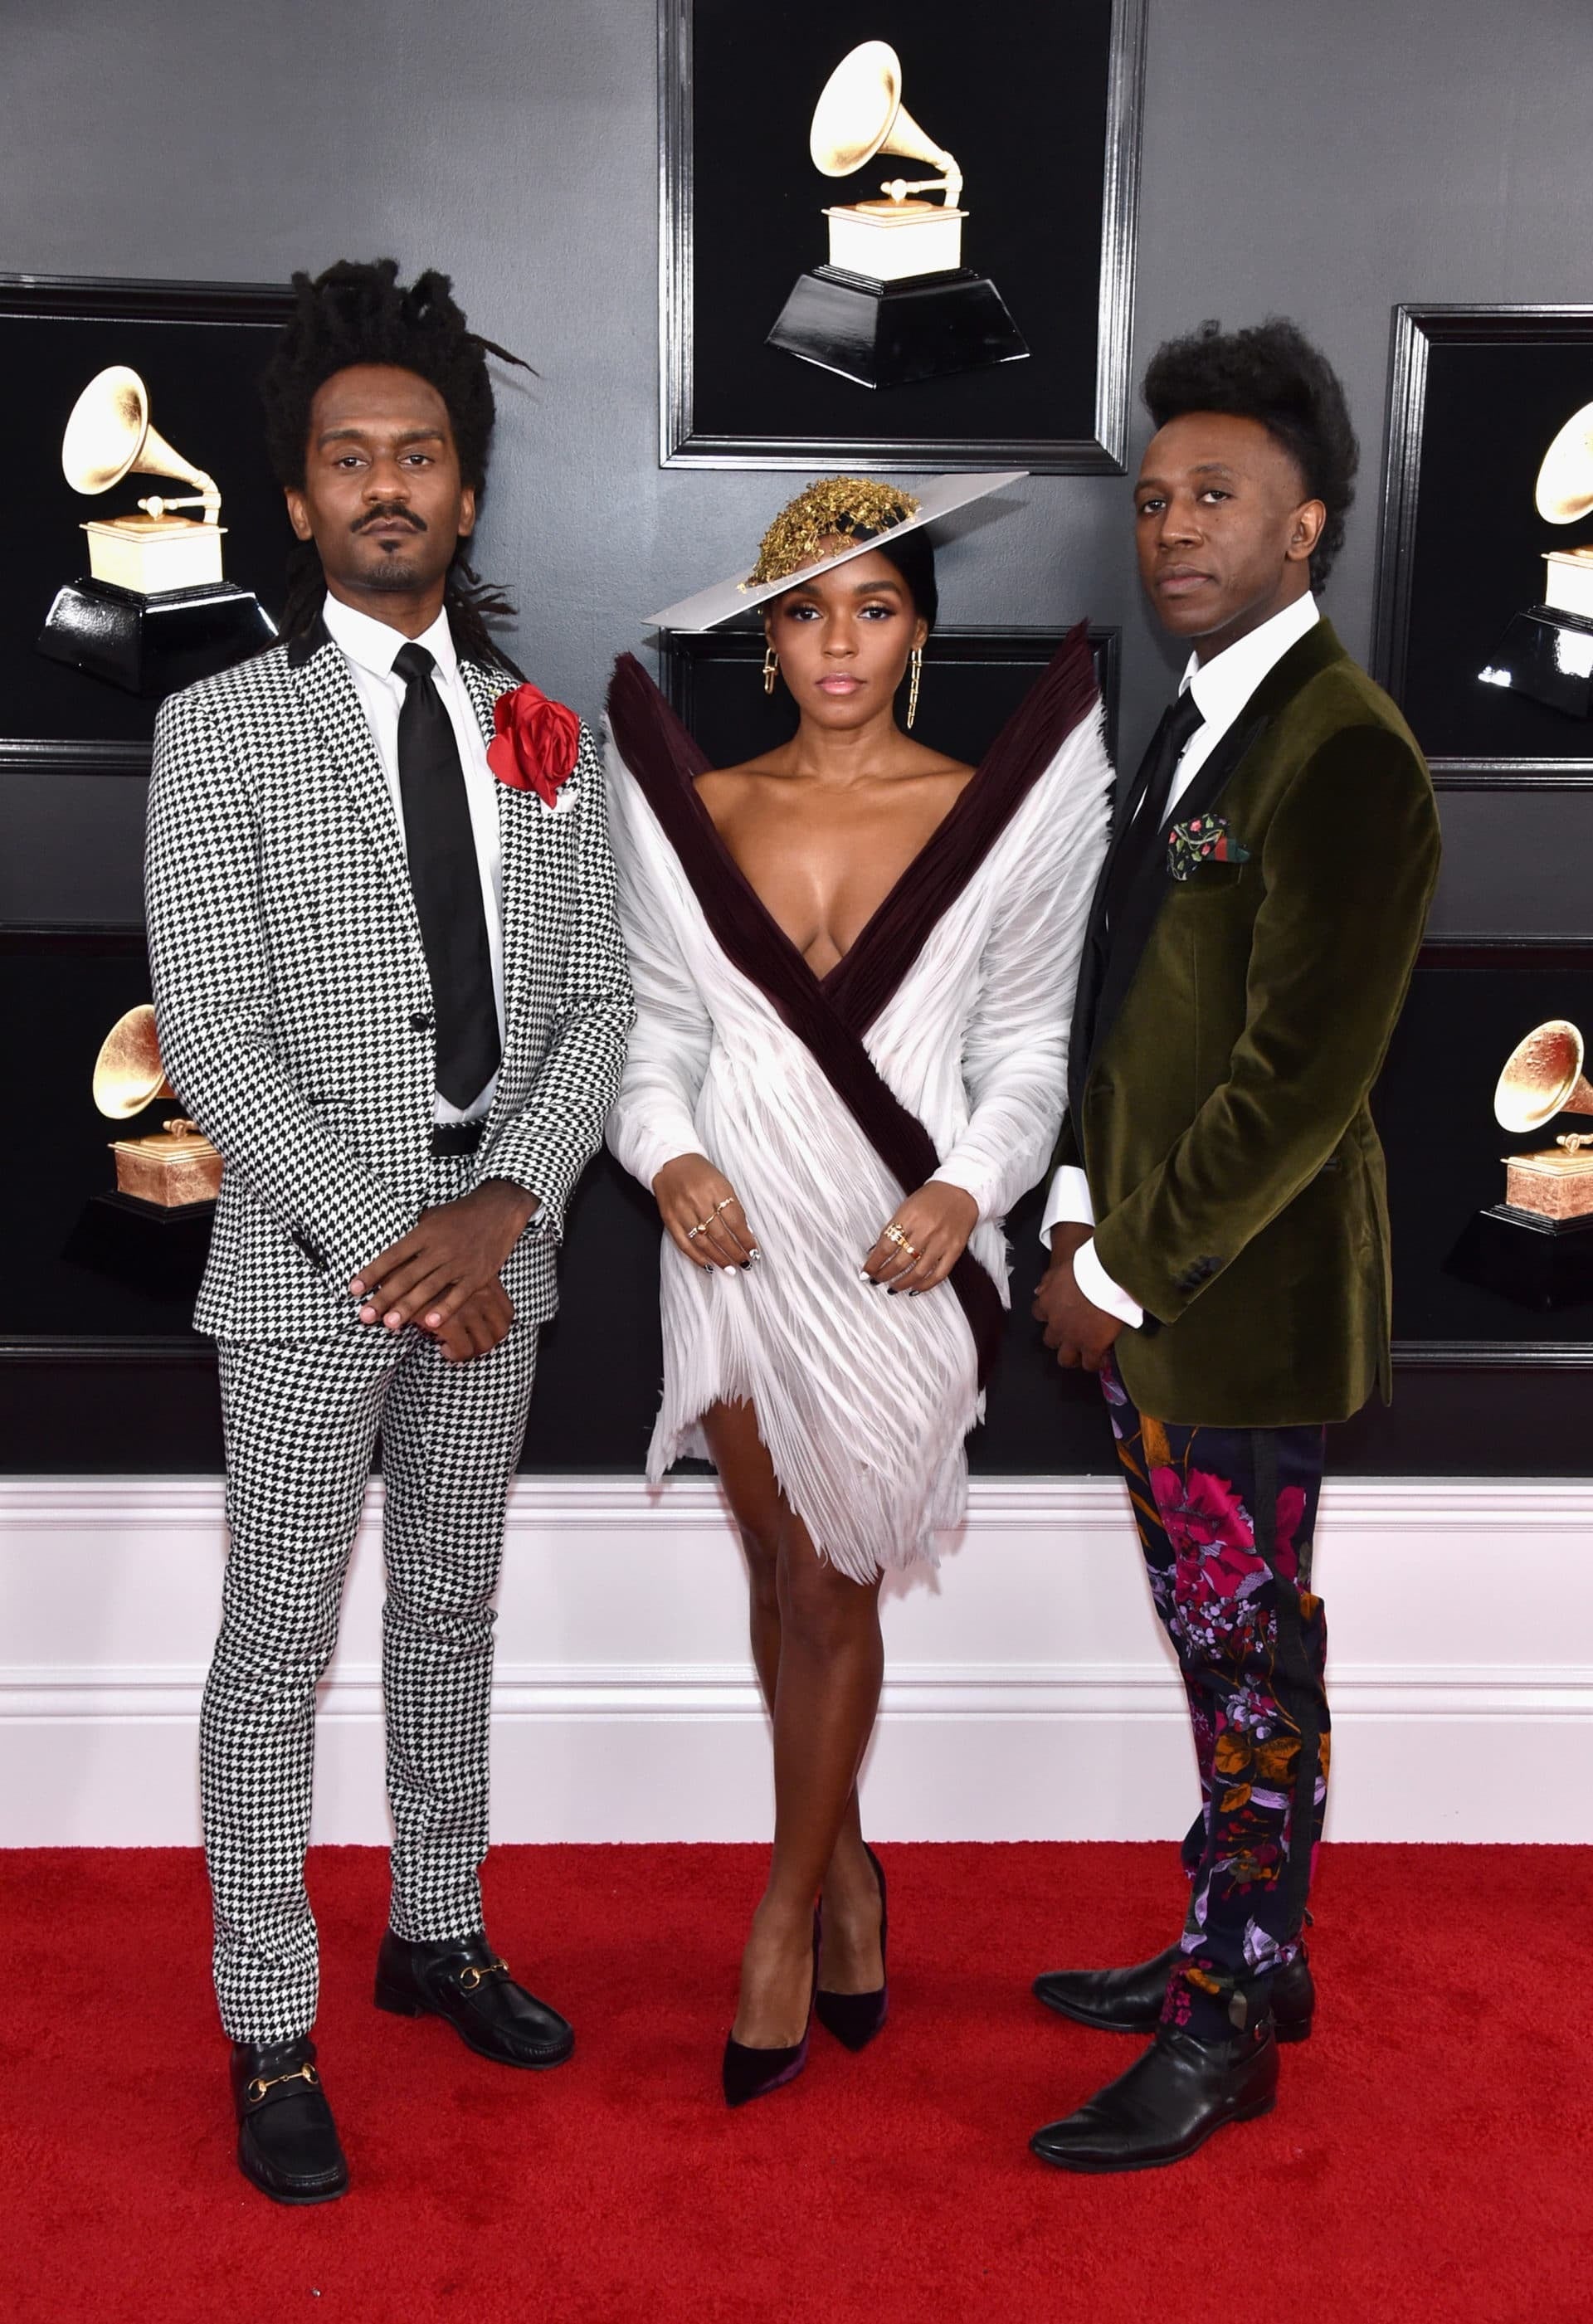 These Ladies Had Some Of The Best Red Carpet Looks At The 2019 Grammys